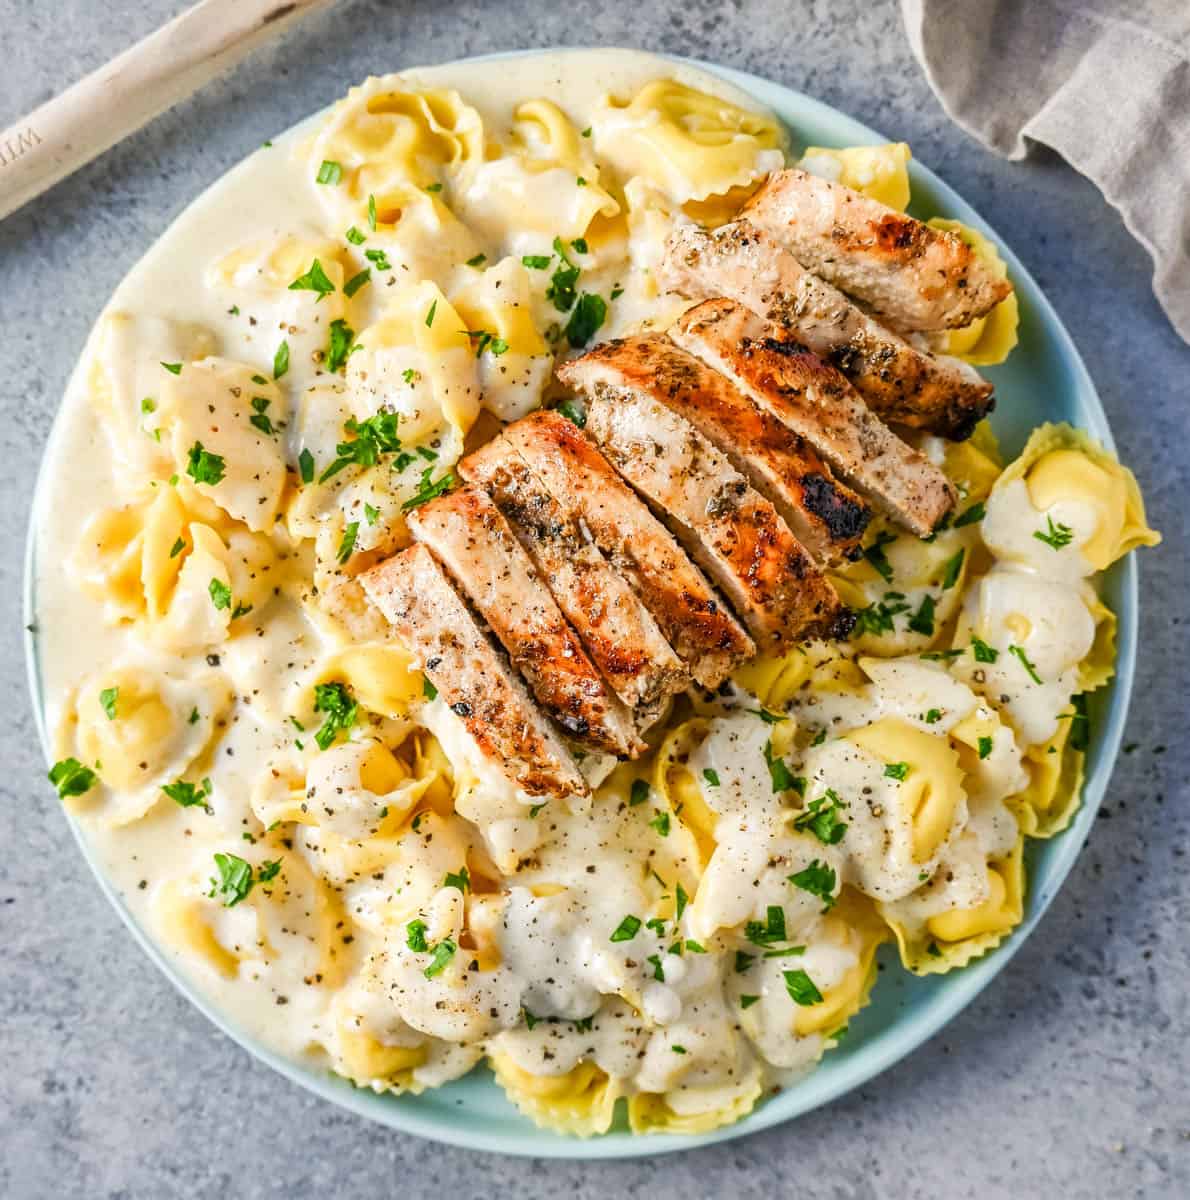 Tortellini Alfredo with Grilled Chicken is made with cheese tortellini tossed with parmesan cheese alfredo sauce and served with Italian grilled chicken. This Chicken Tortellini Alfredo Recipe is the ultimate comfort food.